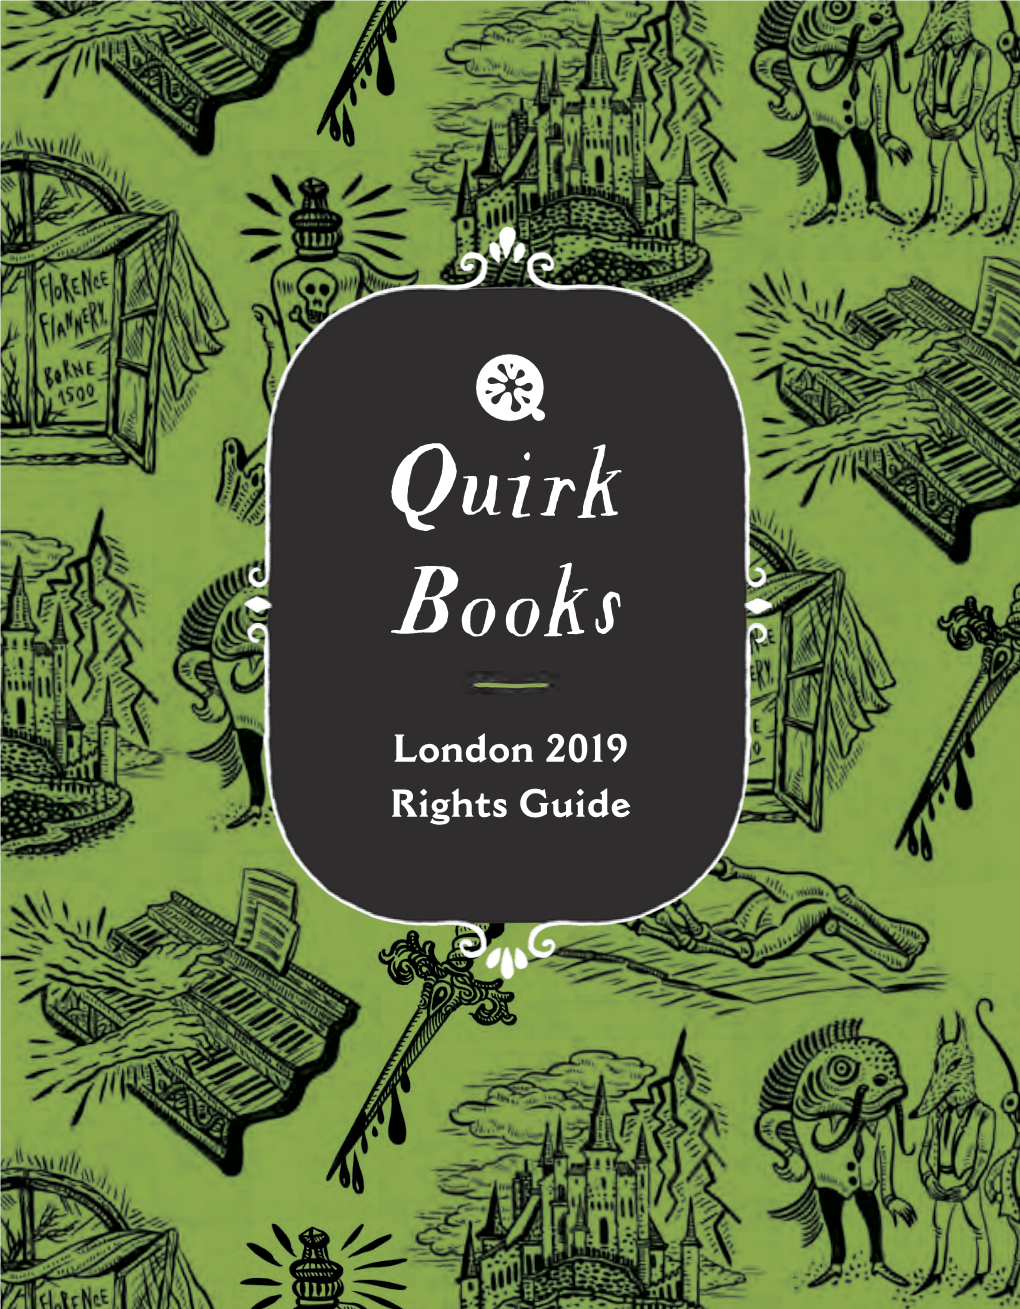 Quirk Books London 2019 Rights Guide